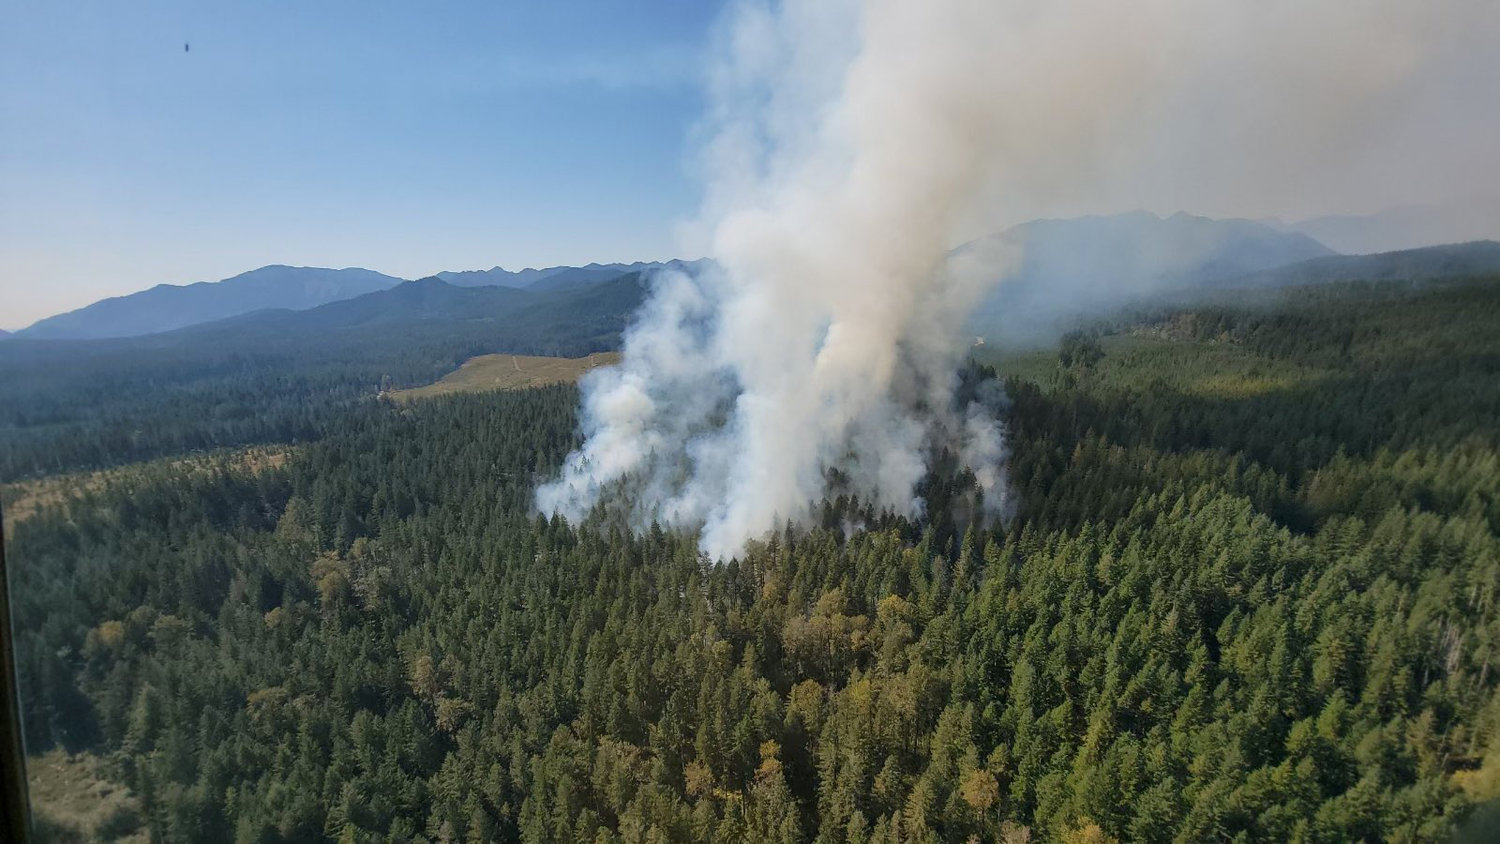 Smoke is visible rising from a fire in the Olympic National Forest that was first reported Wednesday.